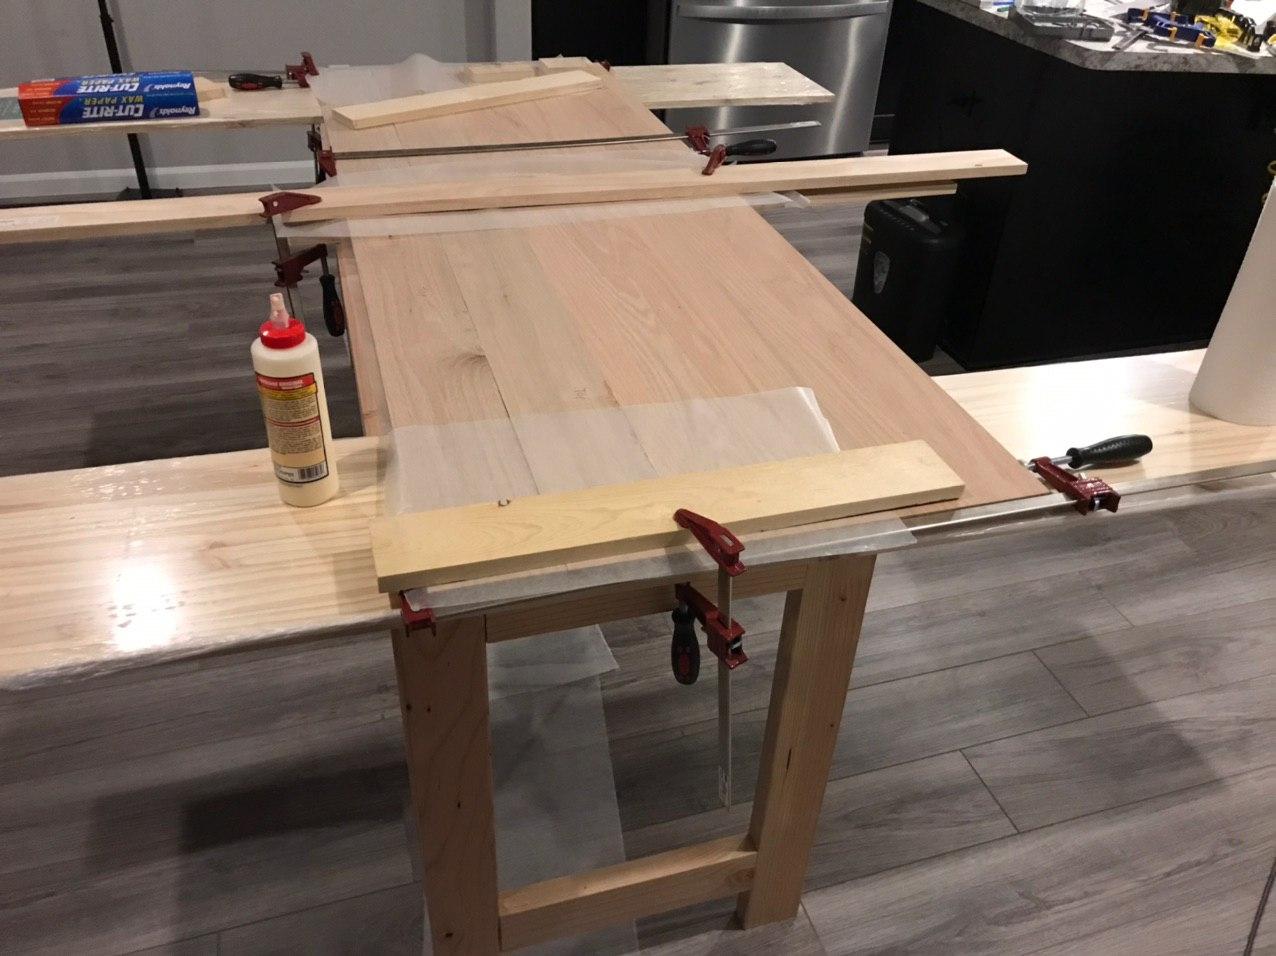 Joining the table with wood glue